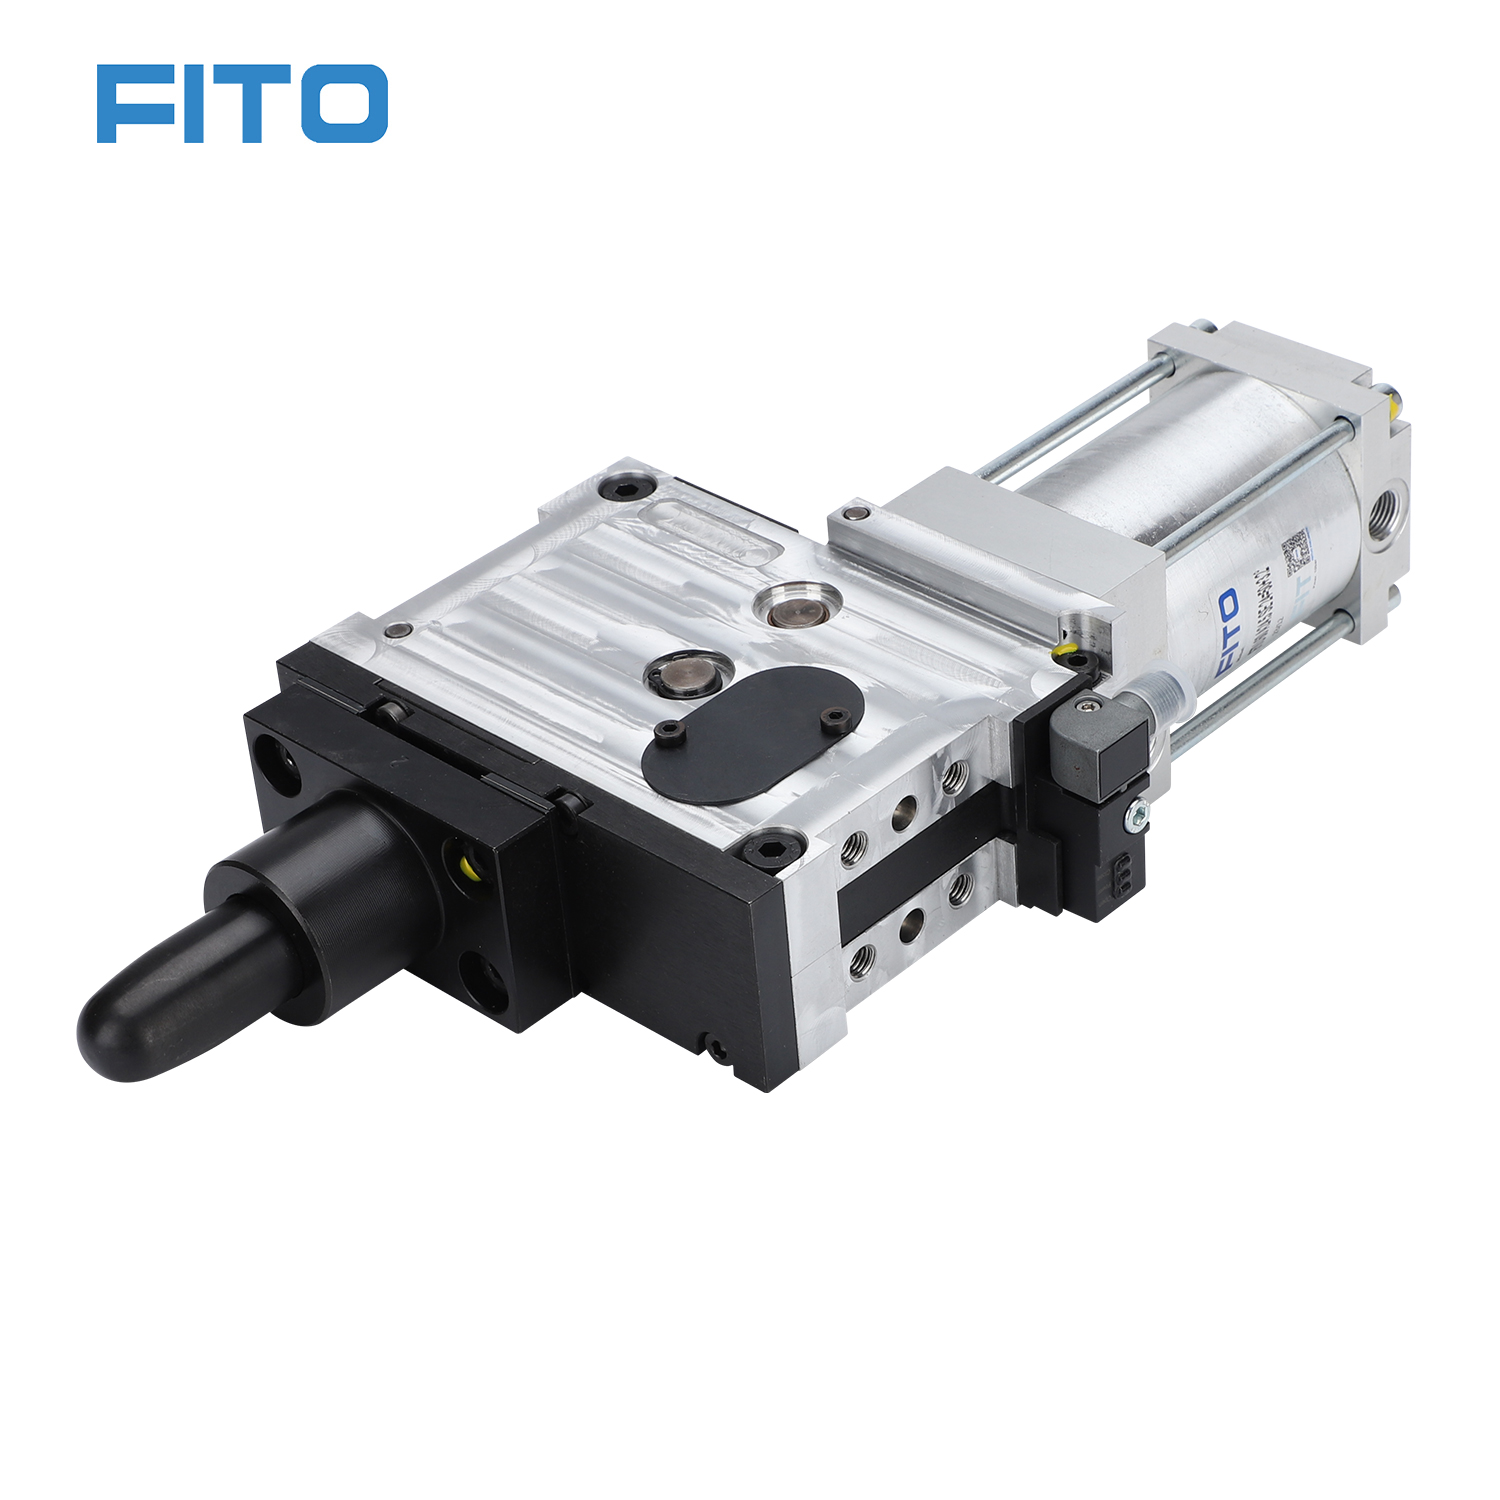 TUNKERS Replace Centering And Locking Device FTU 60 2